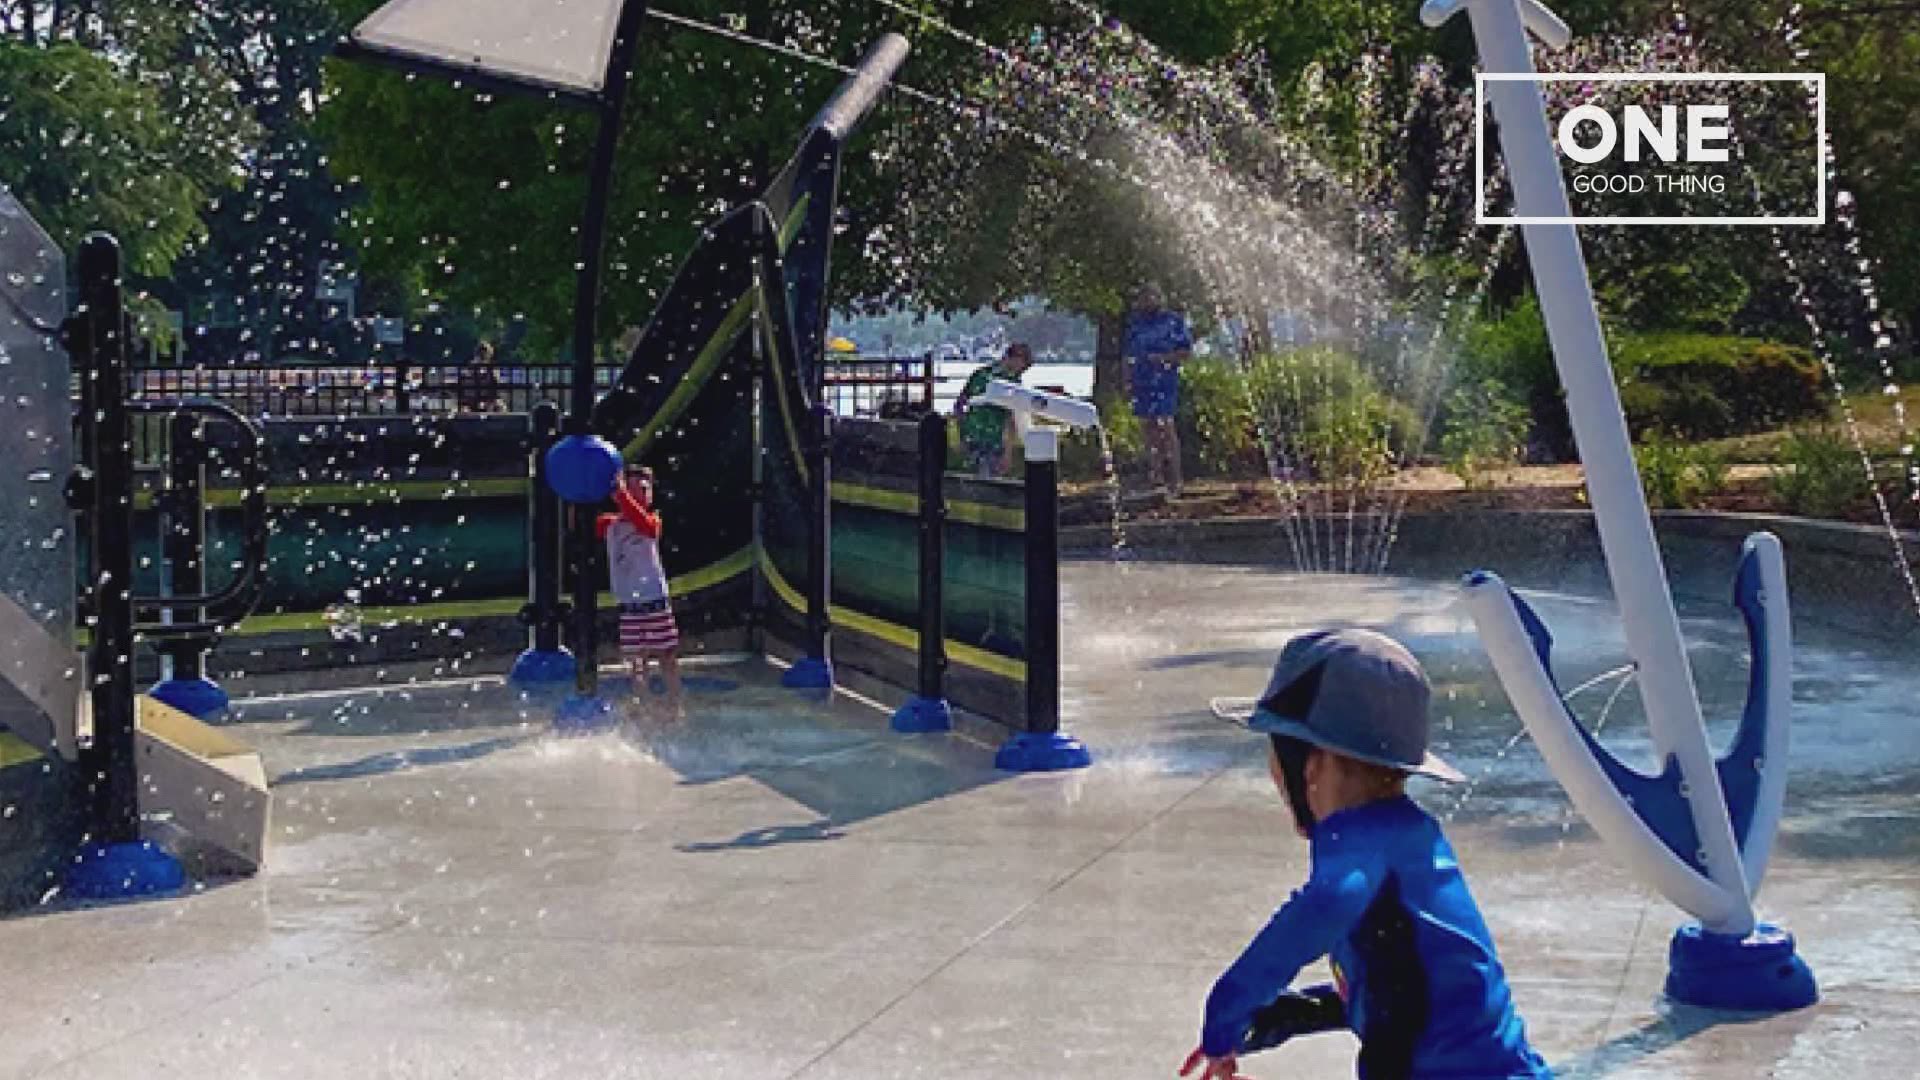 You don't often think about splash pads as winning - or evening being up for - awards. This one did.